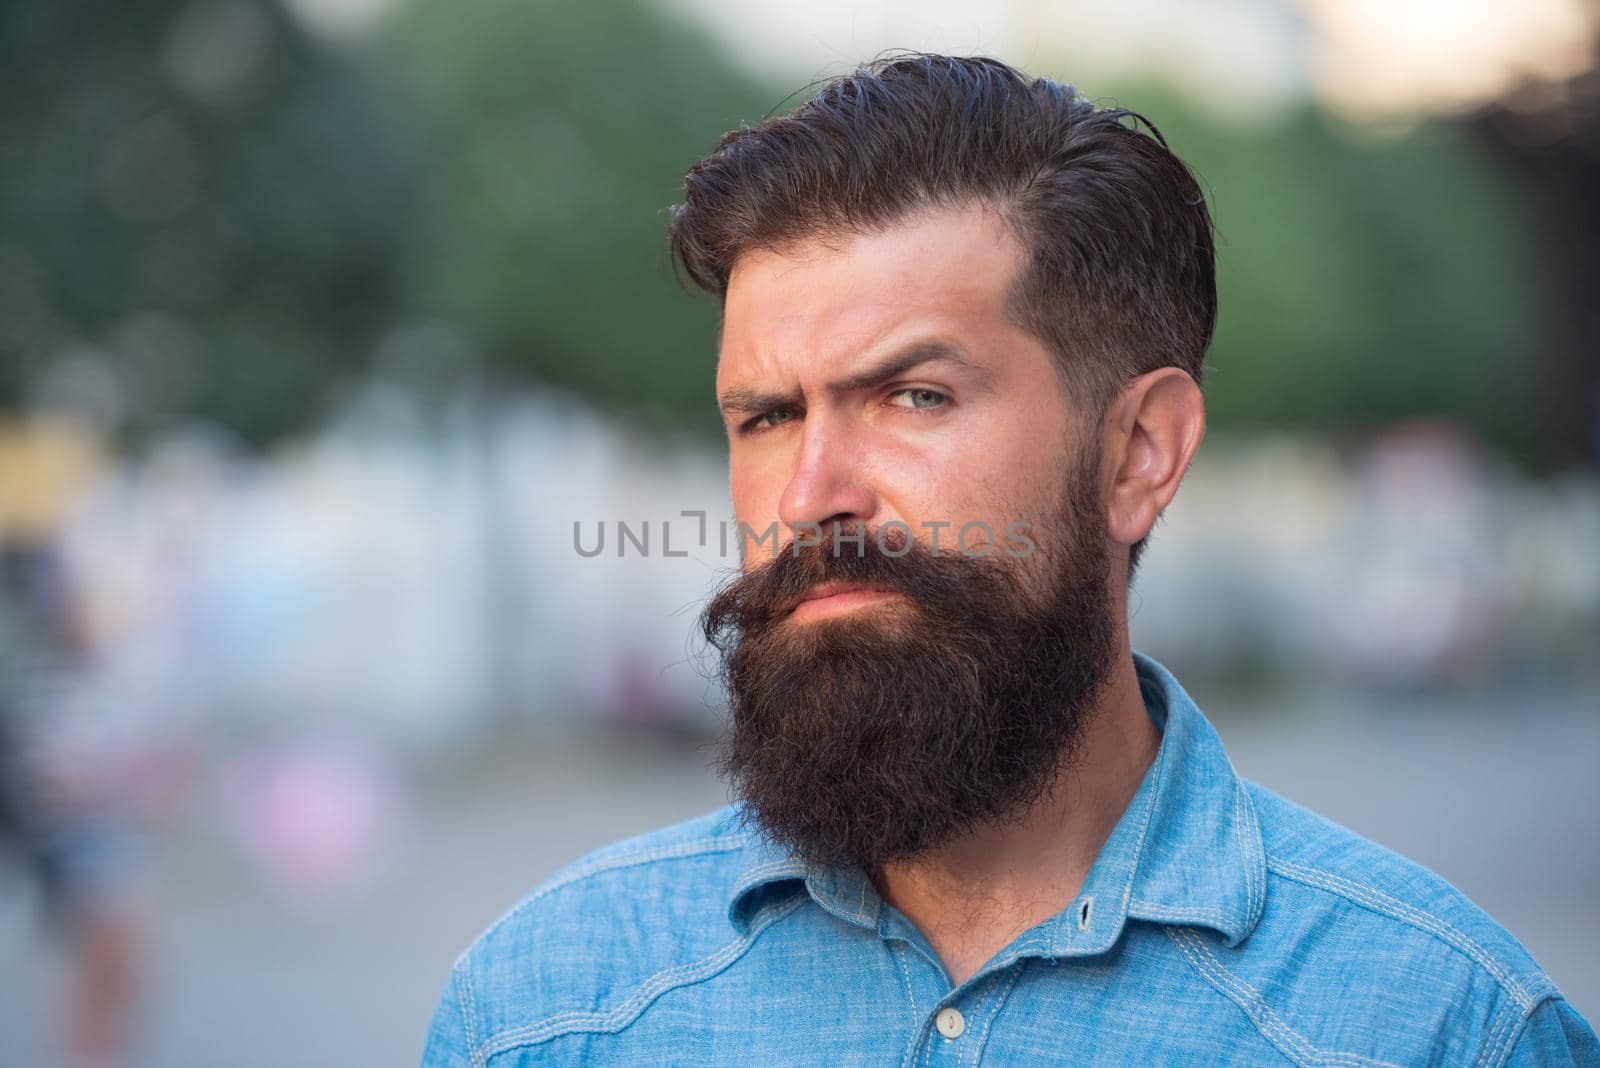 Close-up portrait of serious man model with mustaches and beard in shirt in city